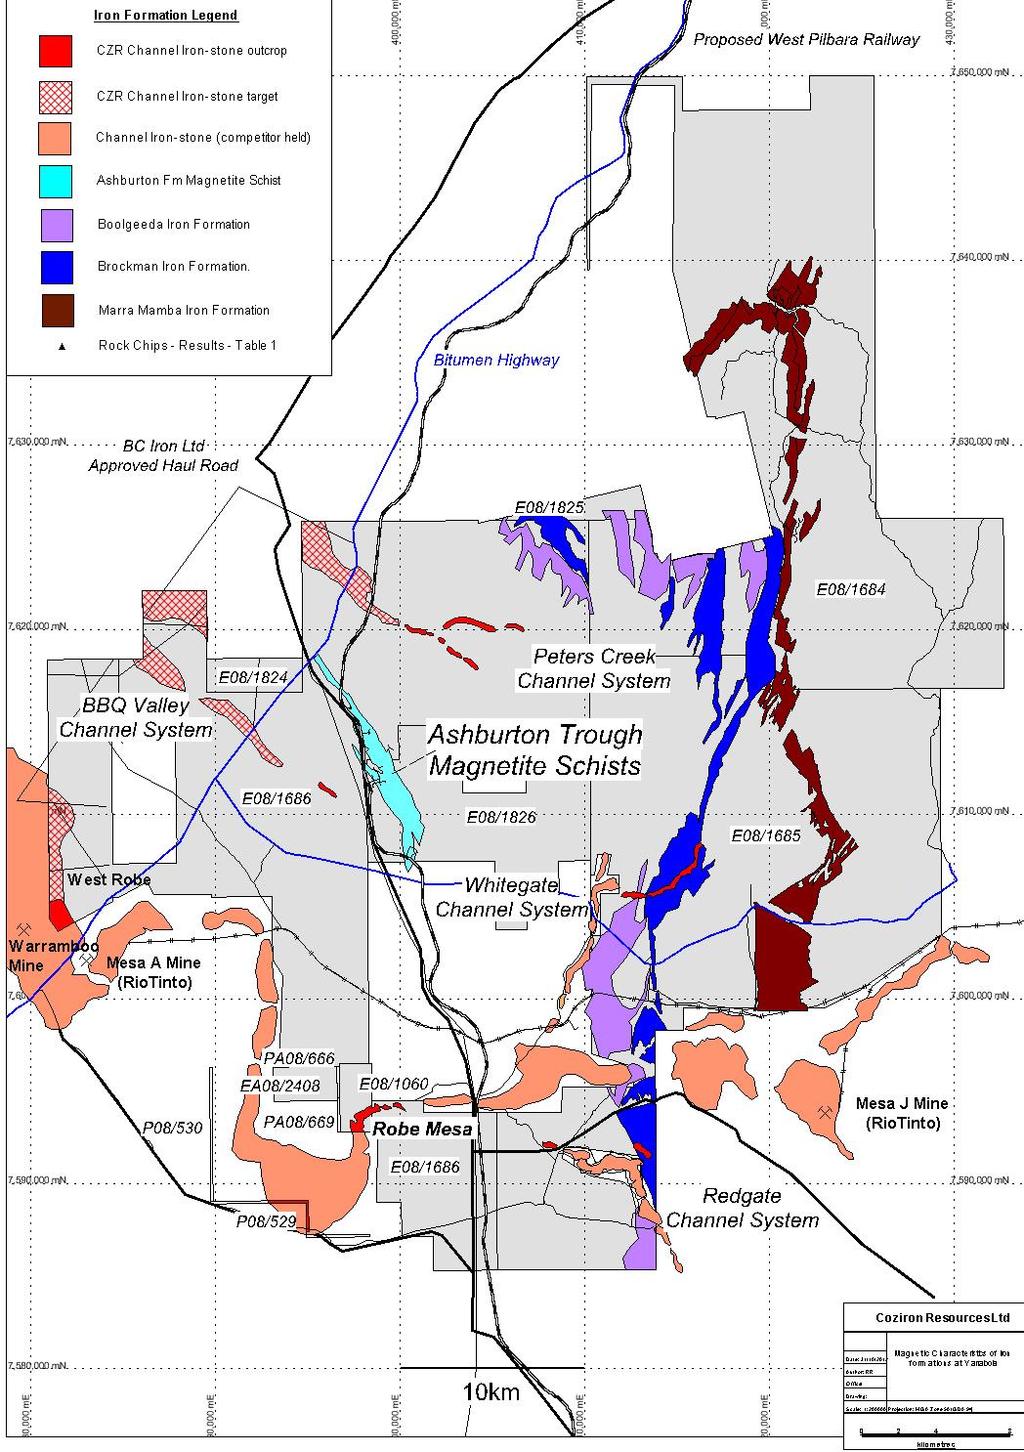 Yarraloola Project Resource Development Potential for multiple CID deposits Planned work to advance the Robe Mesa project from indicated to measured and test for resource extensions over next 6